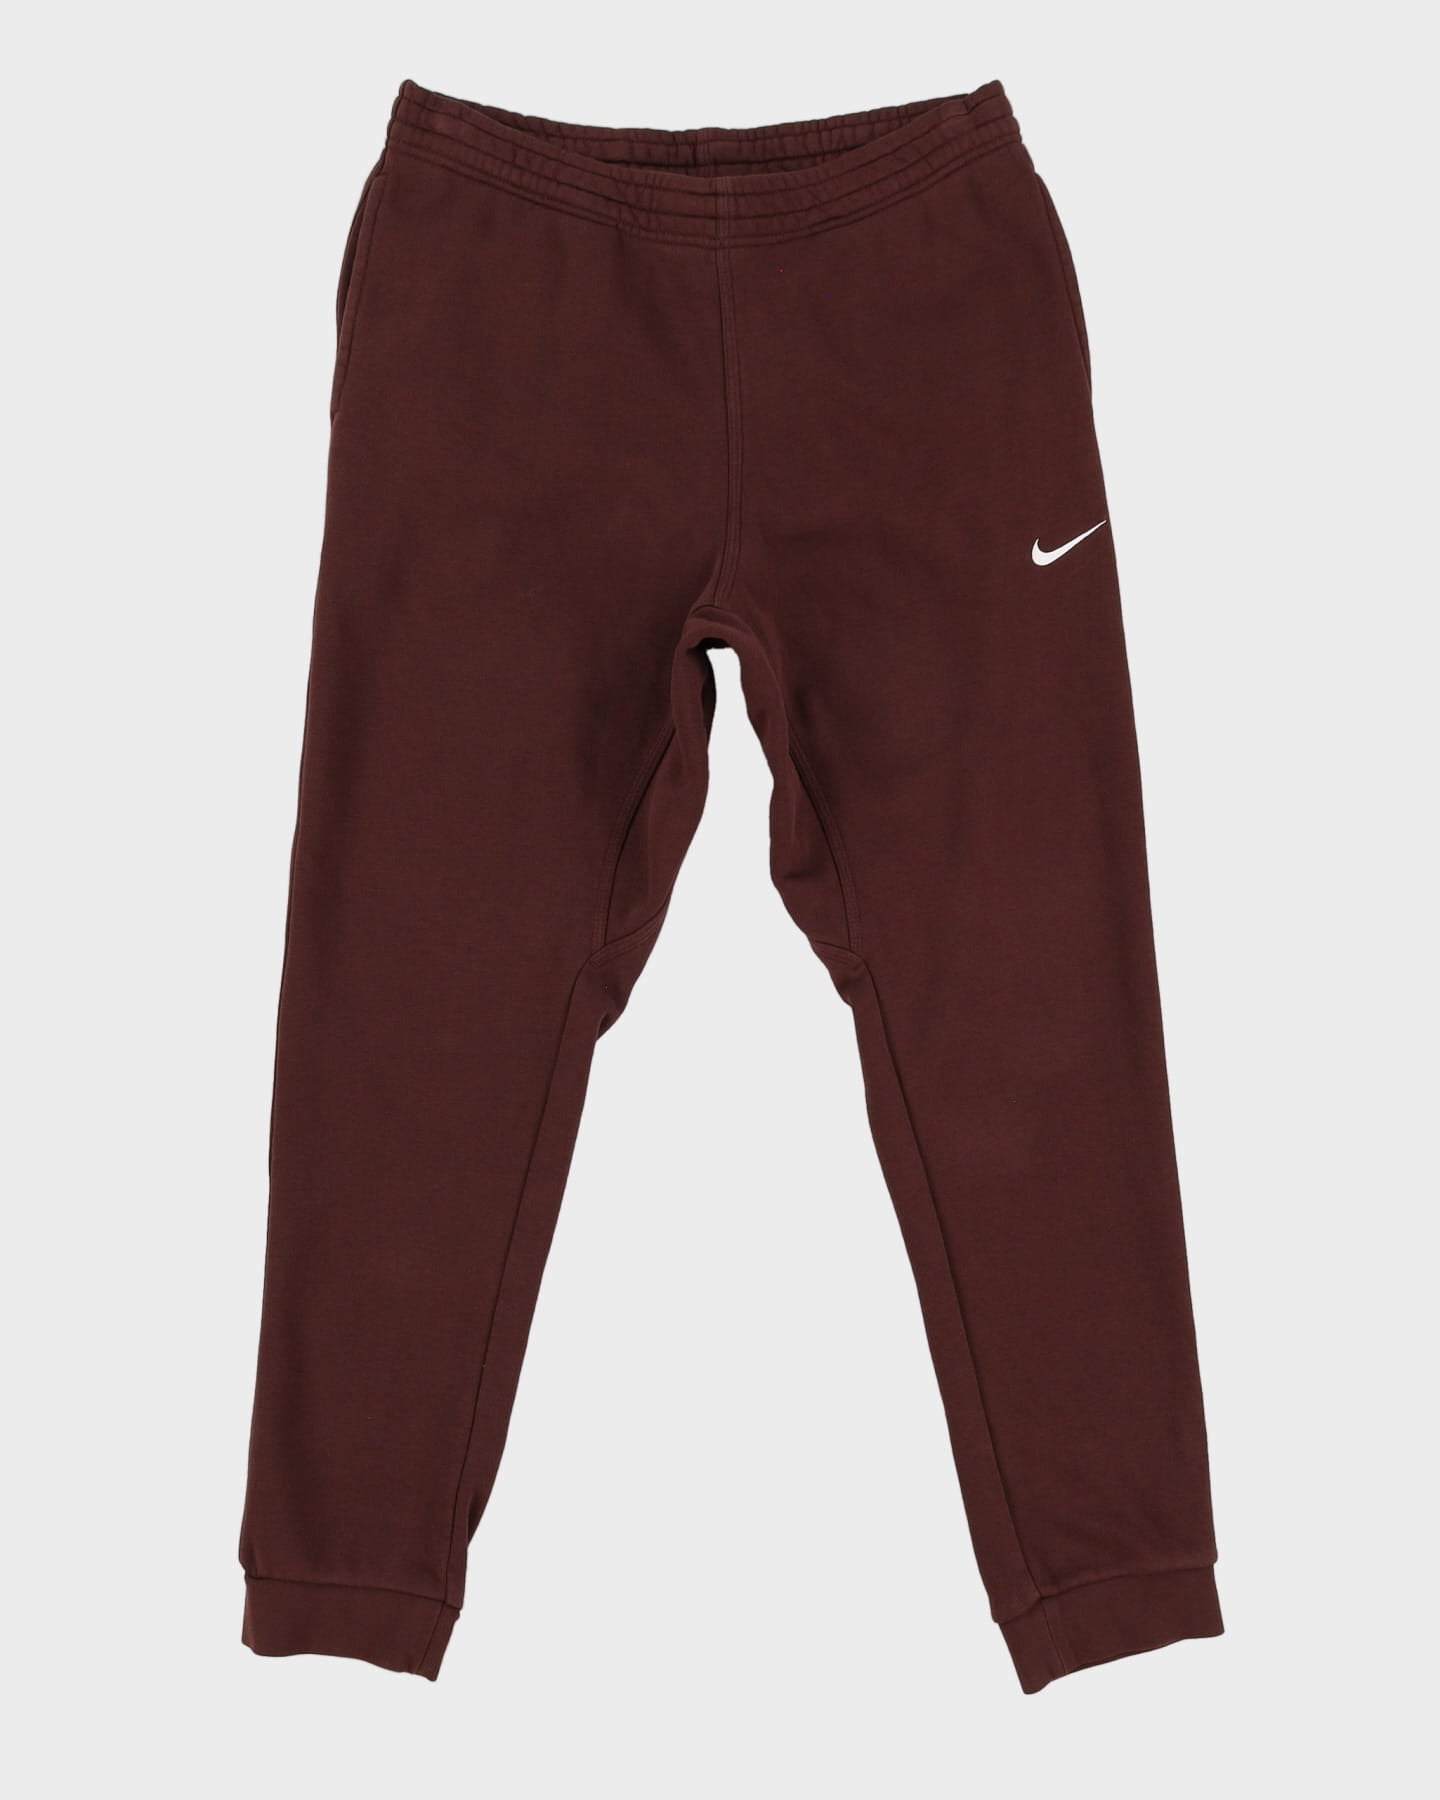 Nike Brown Tracksuit Bottoms - XL